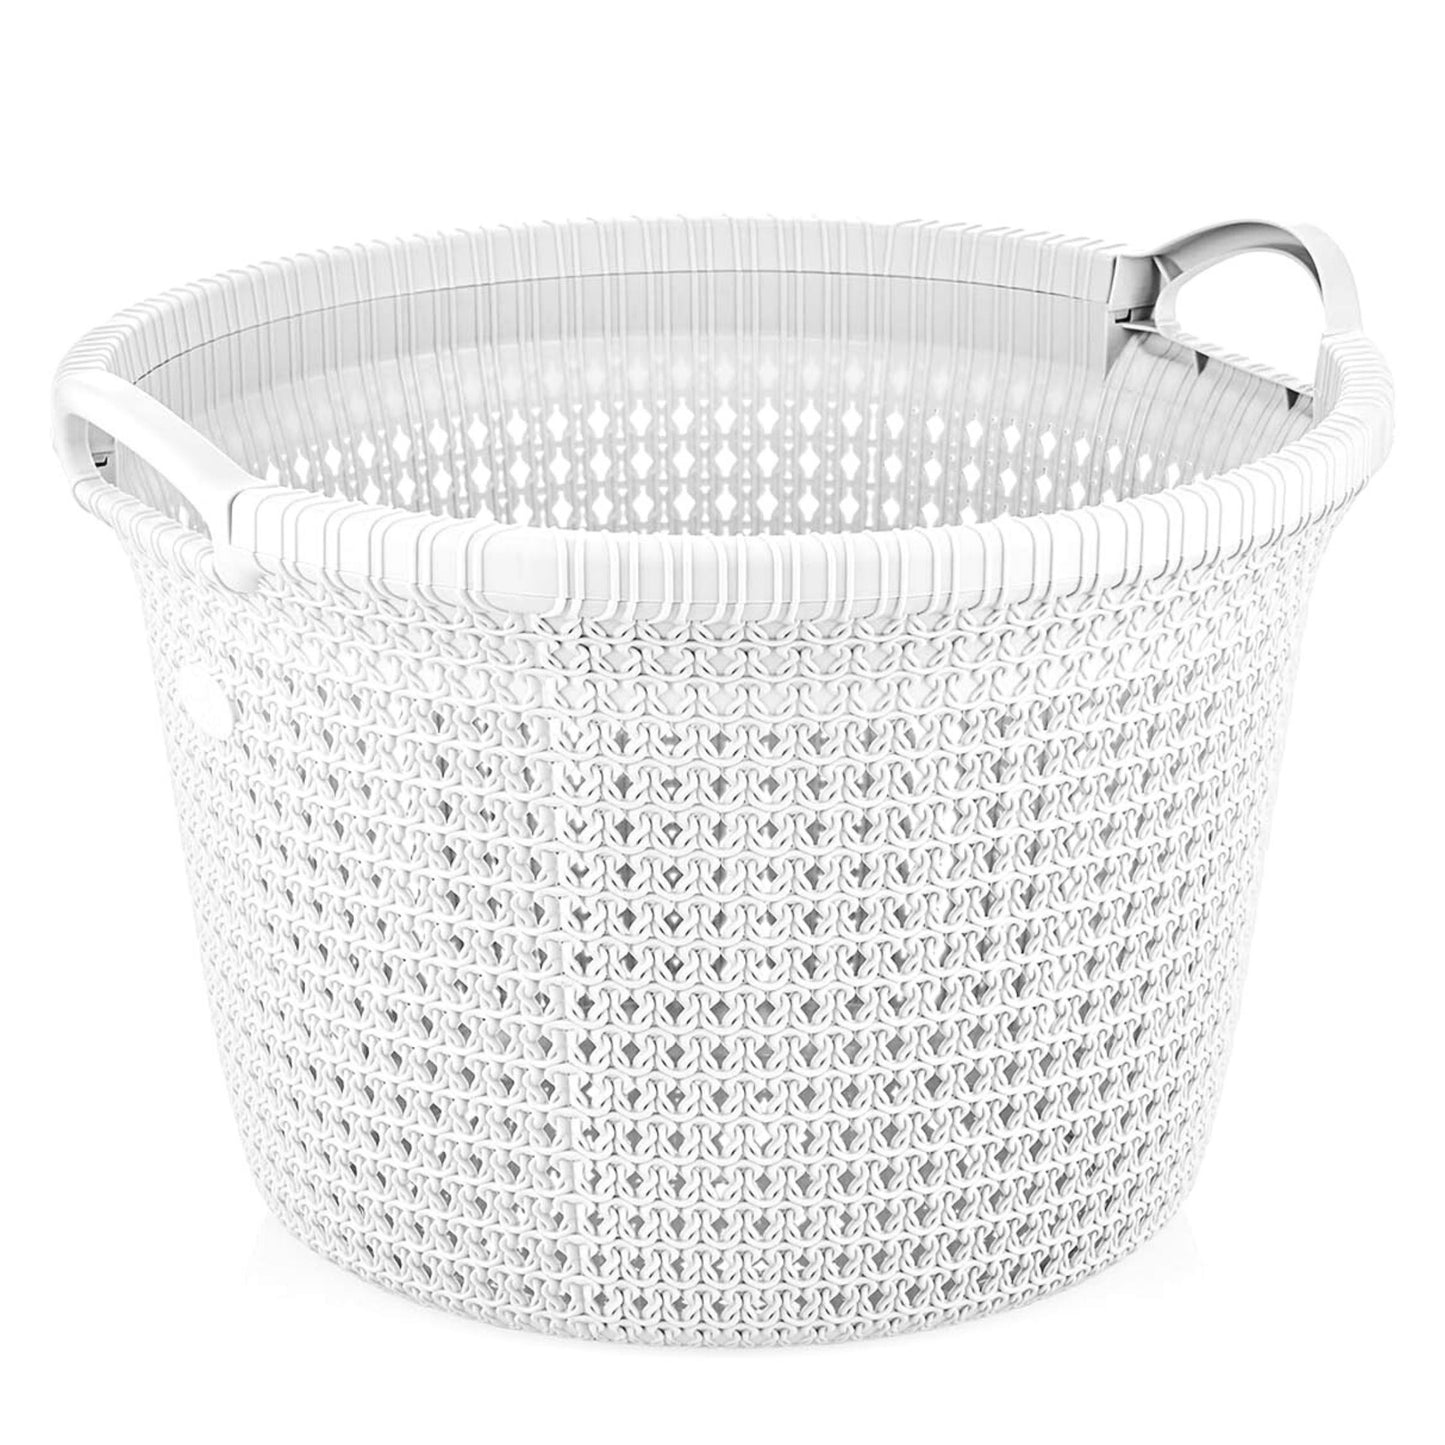 35 Litre Round Wash Basket for Laundry with Handles Spacious Rattan Design